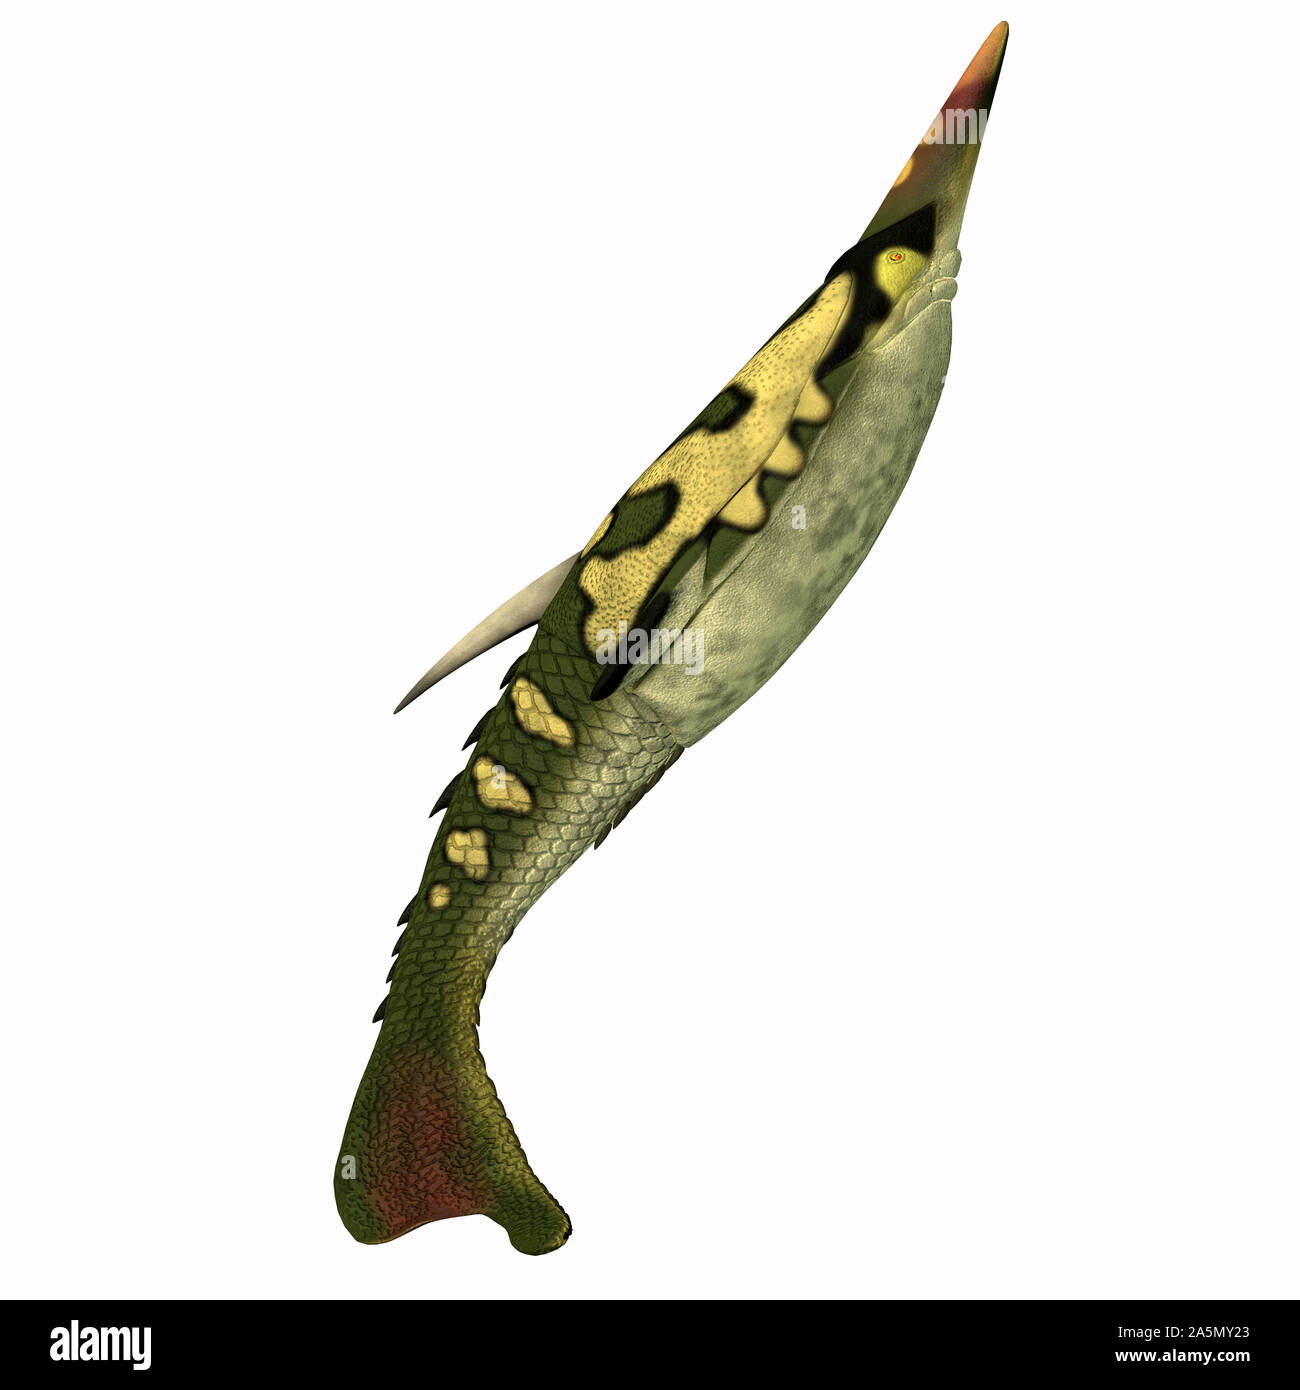 Pteraspis was a carnivorous marine fish that was heavily armored and lived during the Devonian Period. Stock Photo